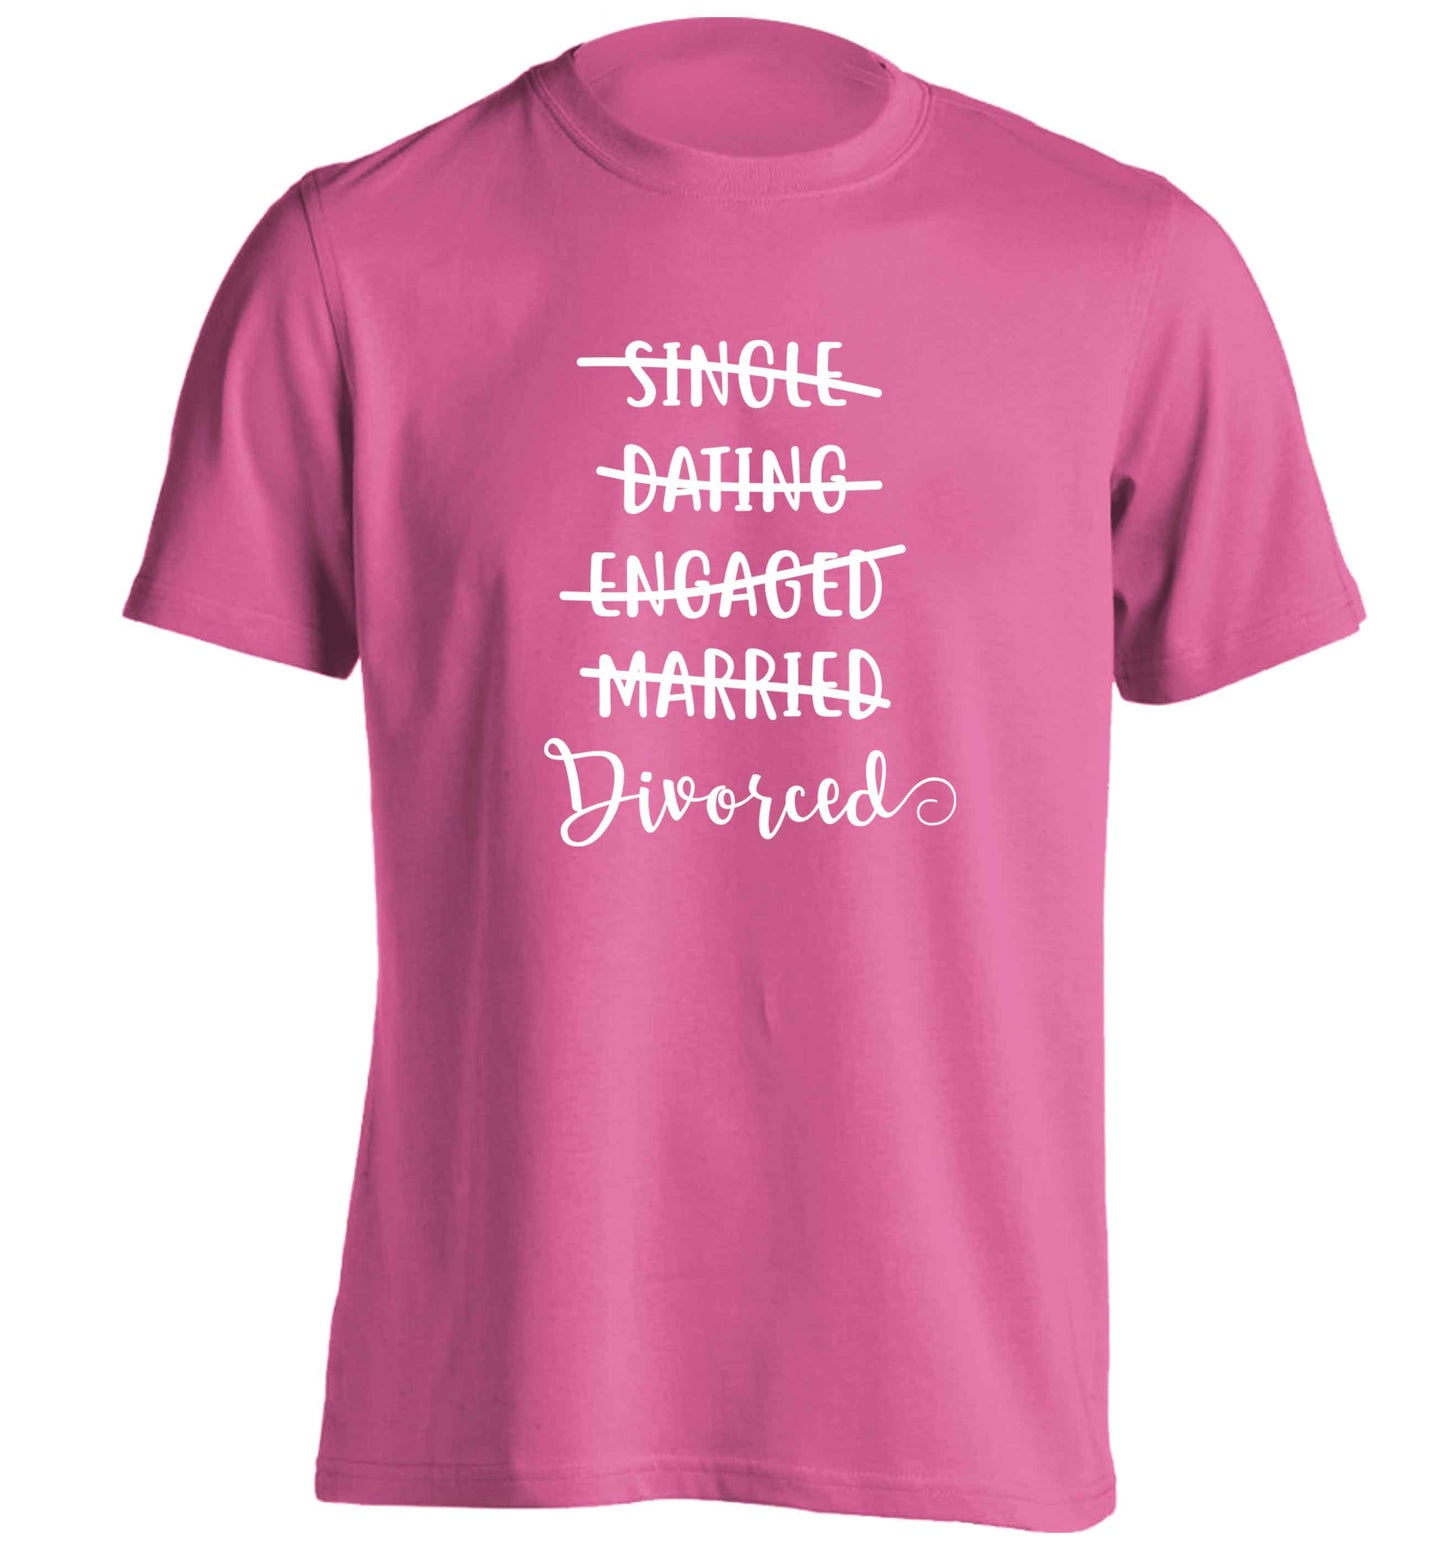 Single, dating, engaged, divorced adults unisex pink Tshirt 2XL